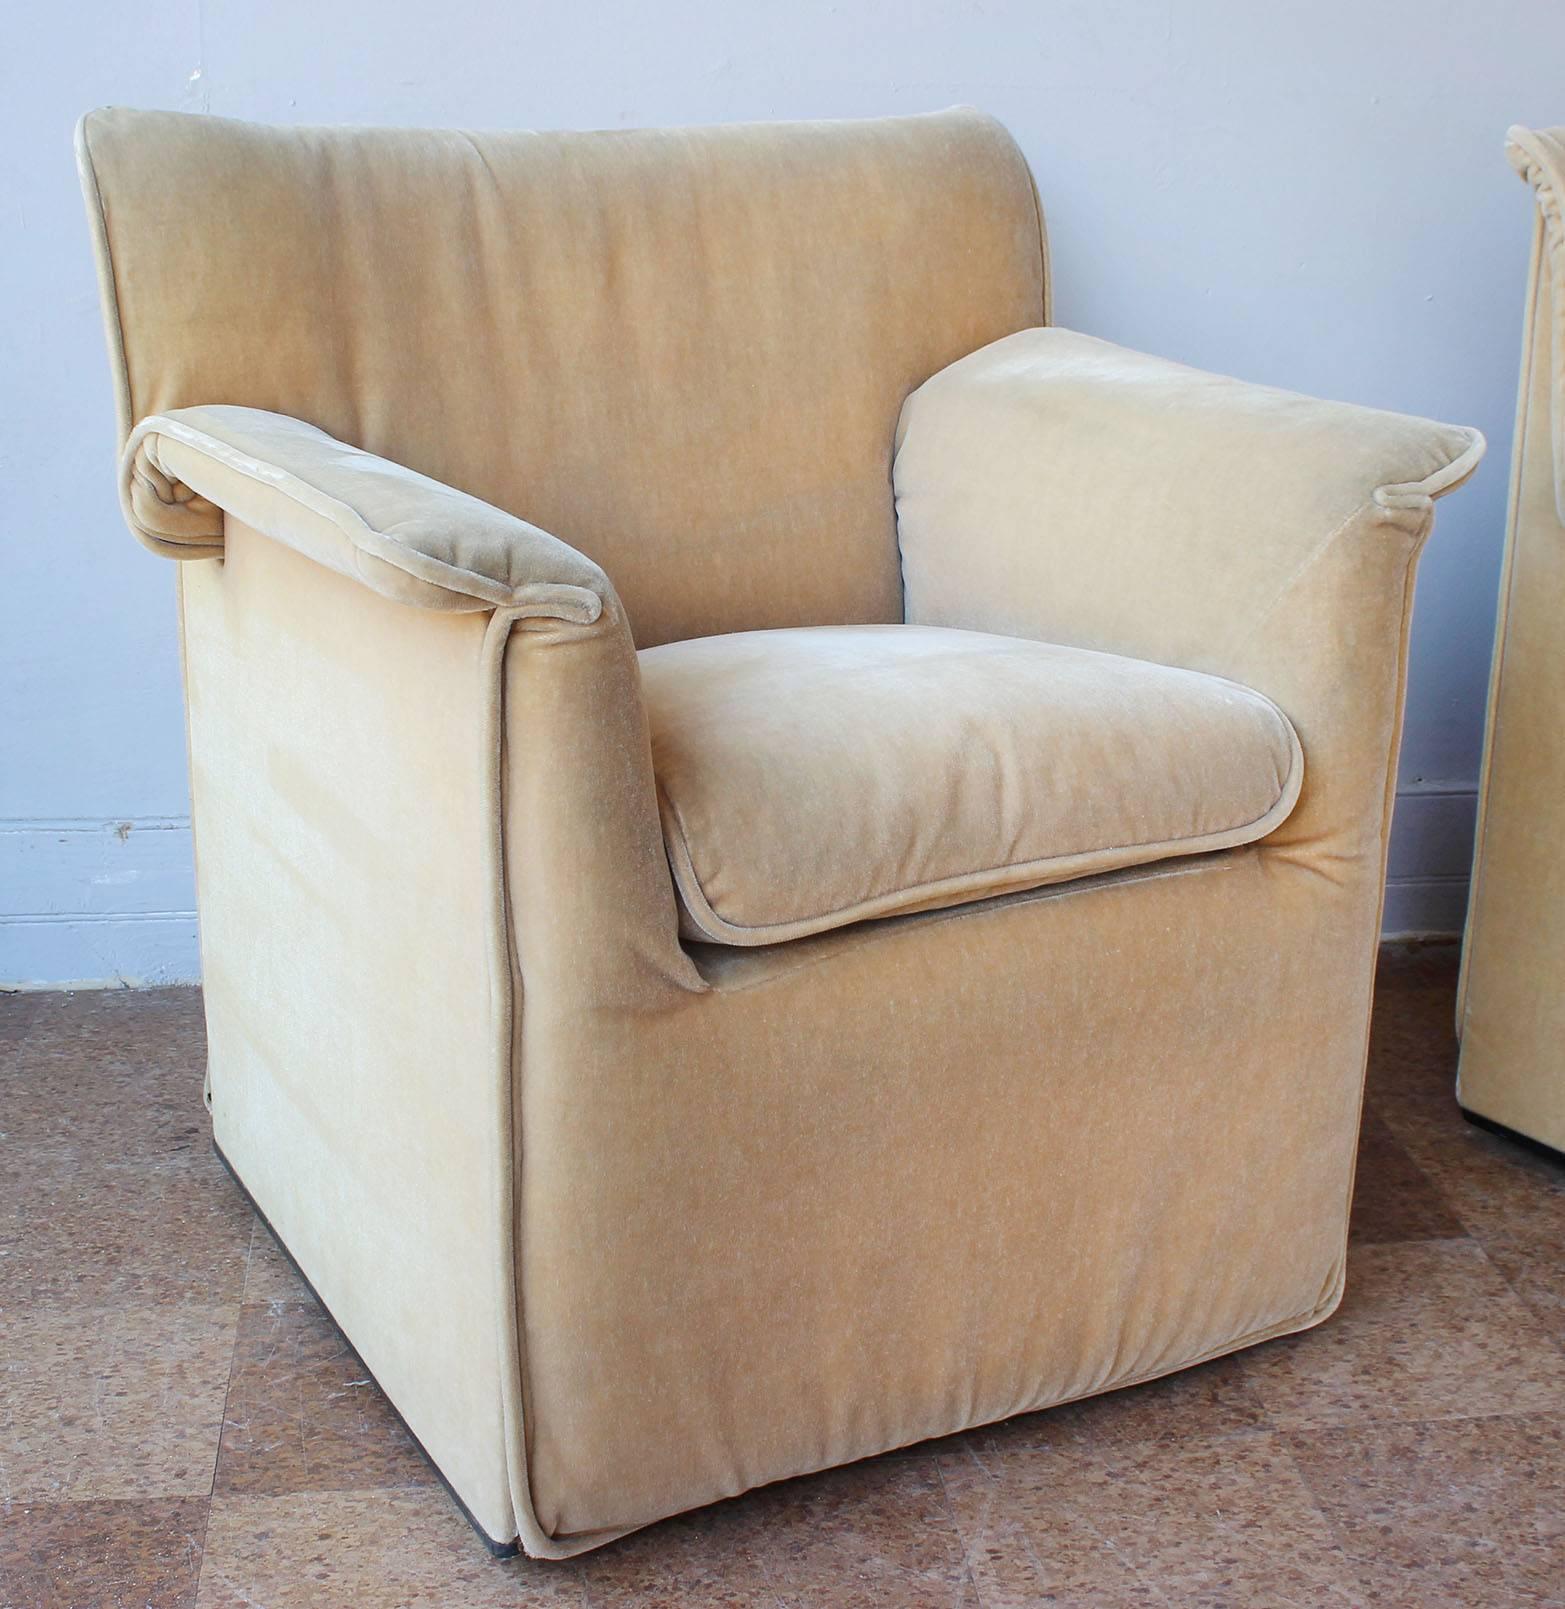 A cozy pair of Tobia Scarpa for B & B Italia armchairs in original pinky-beige wool velvet upholstery, on casters.

complementary upholstery within 30 miles.